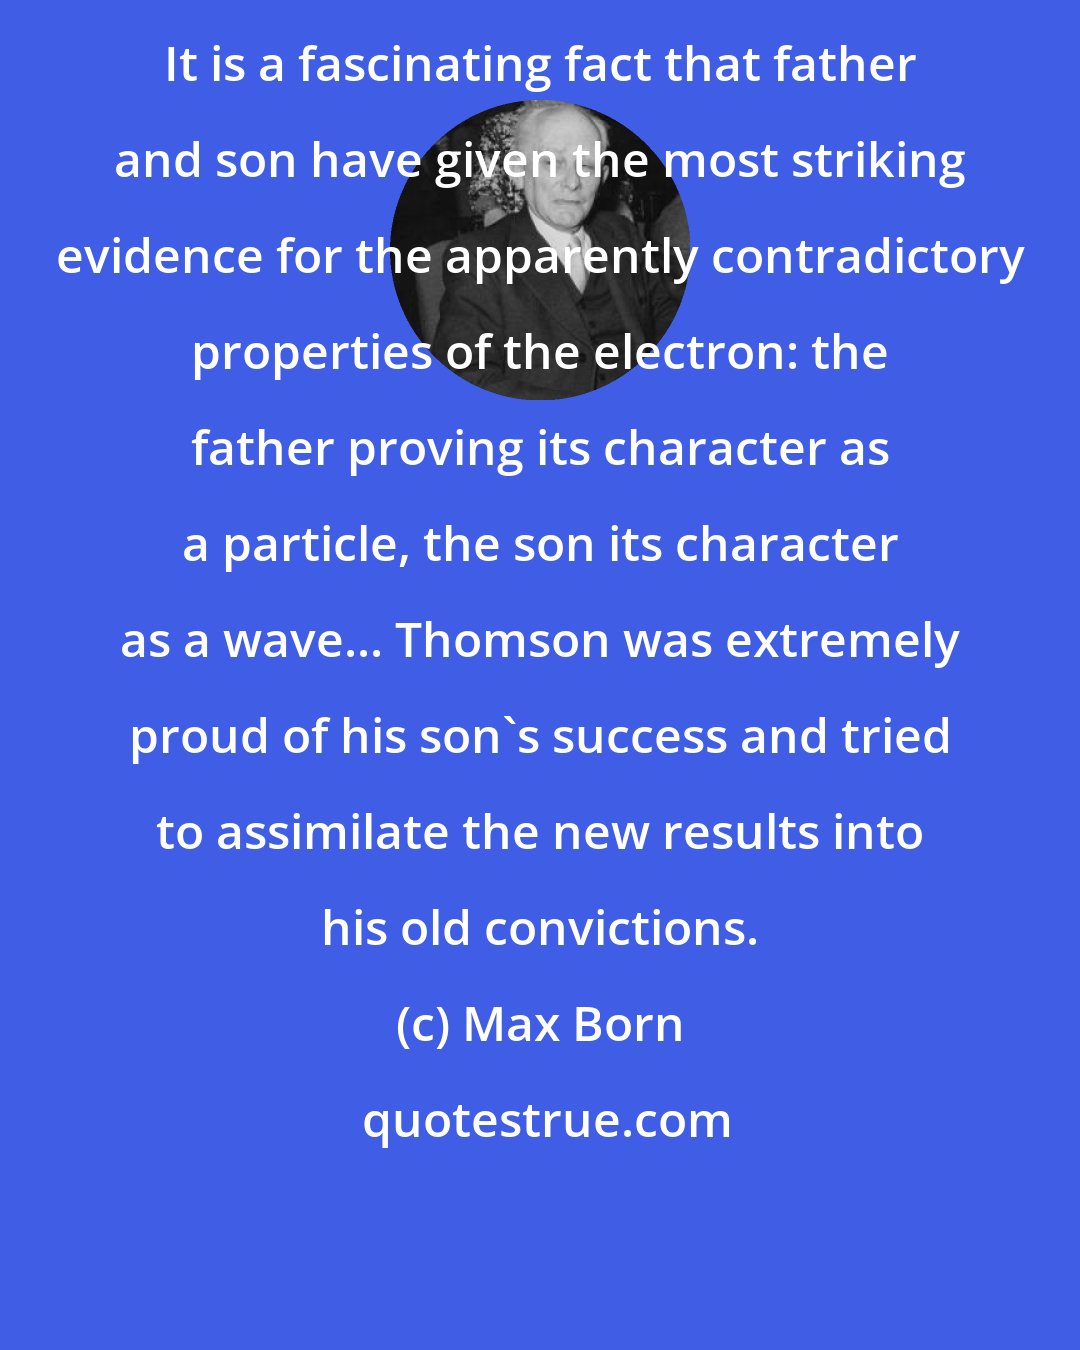 Max Born: It is a fascinating fact that father and son have given the most striking evidence for the apparently contradictory properties of the electron: the father proving its character as a particle, the son its character as a wave... Thomson was extremely proud of his son's success and tried to assimilate the new results into his old convictions.